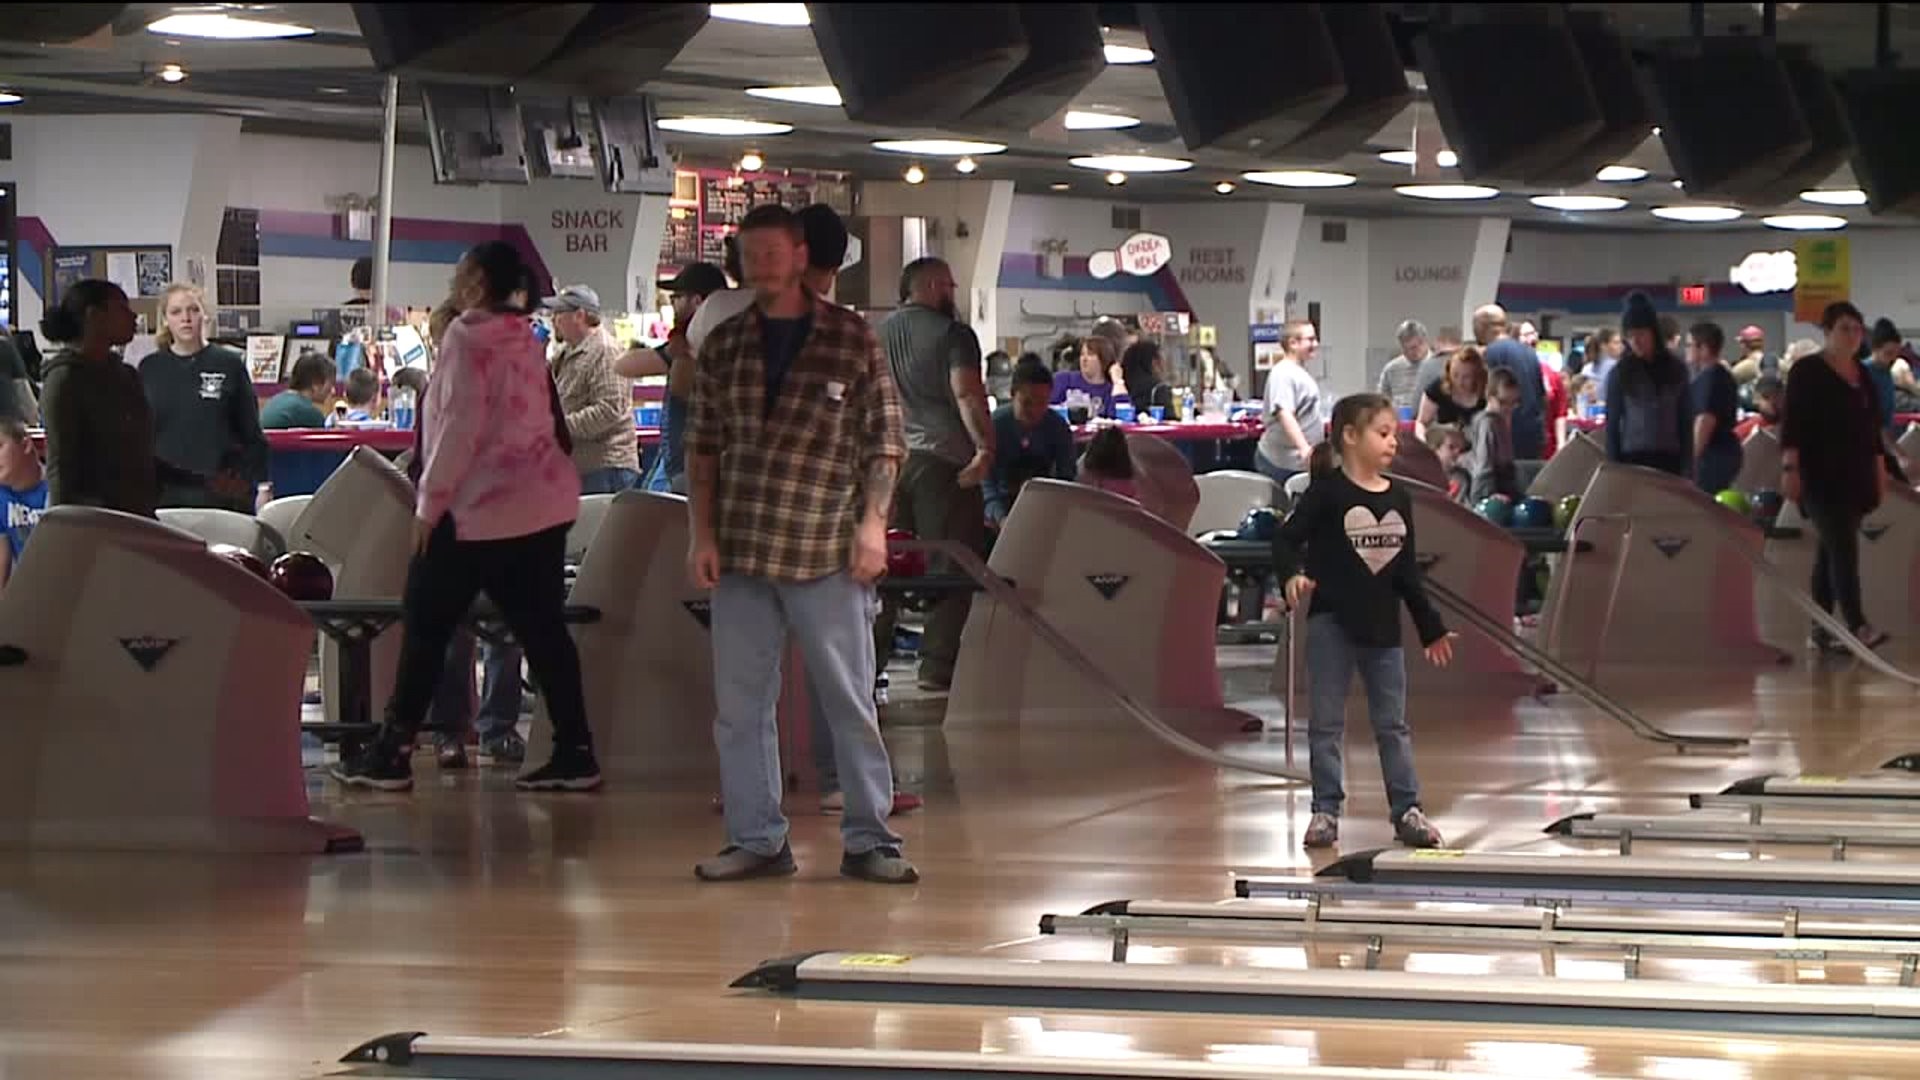 Bowling Center Hosts Day of Fun for Children with Autism